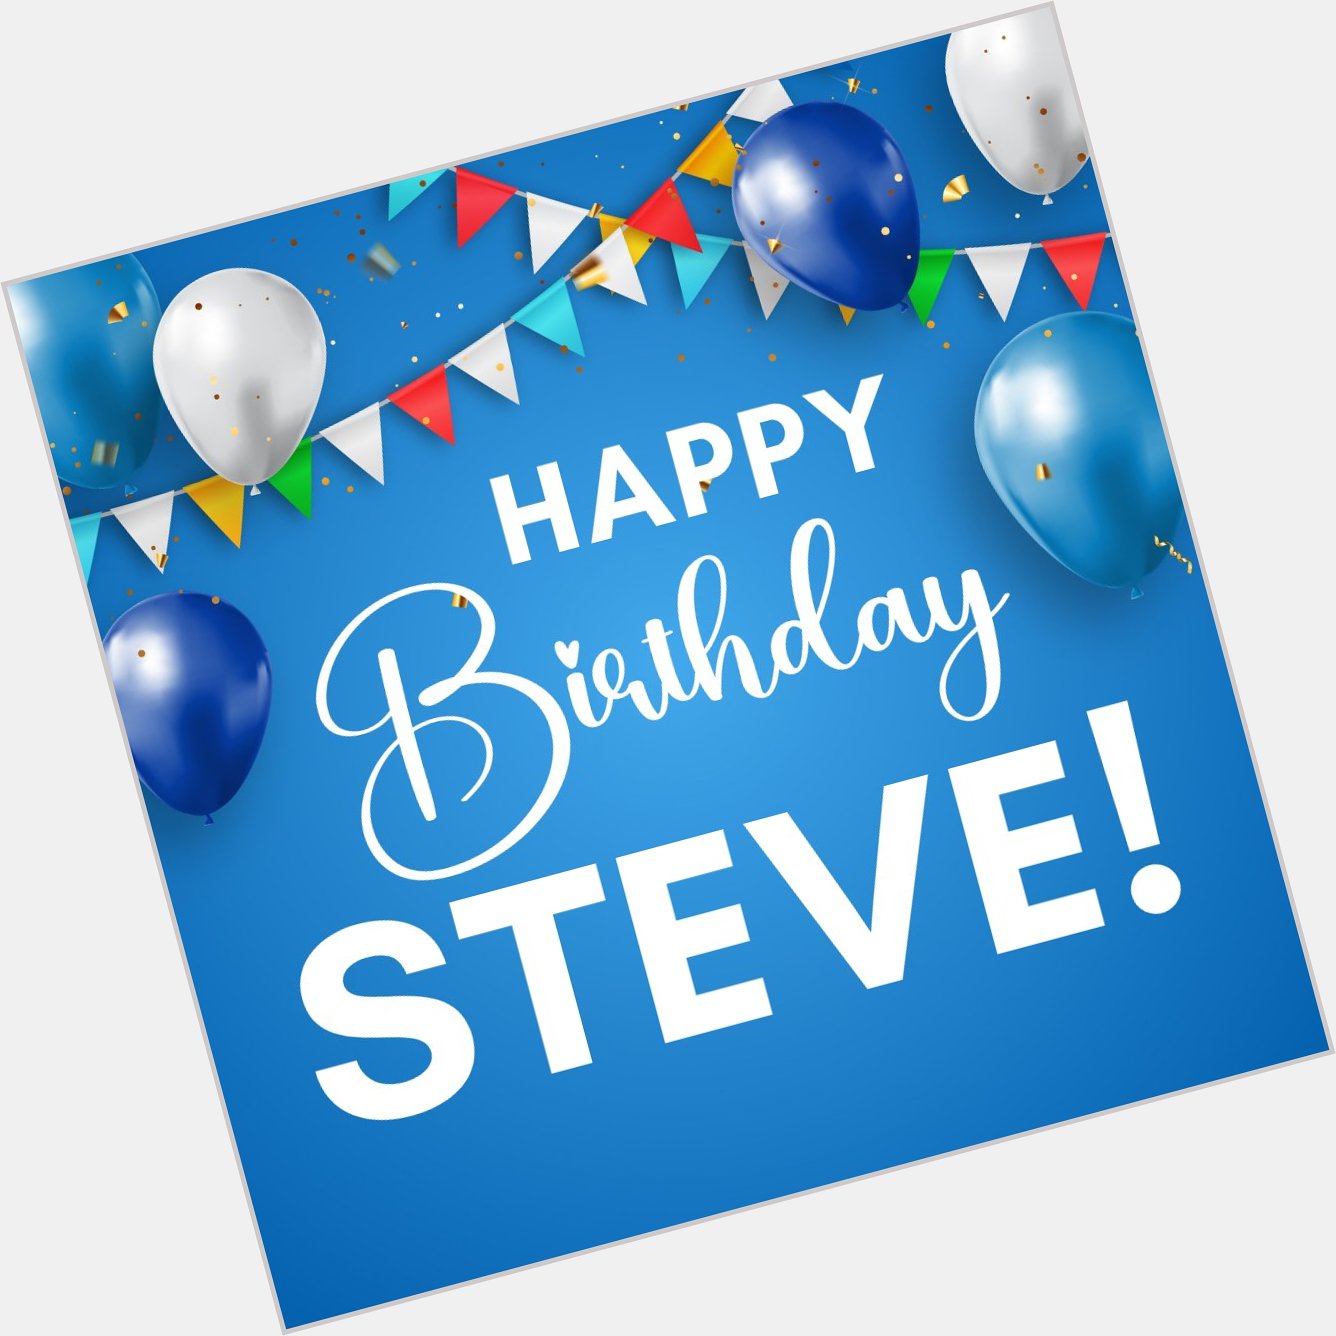 Happy Birthday, Gary \" Steve\" Harris. Wishing all the best to you in the coming year! 